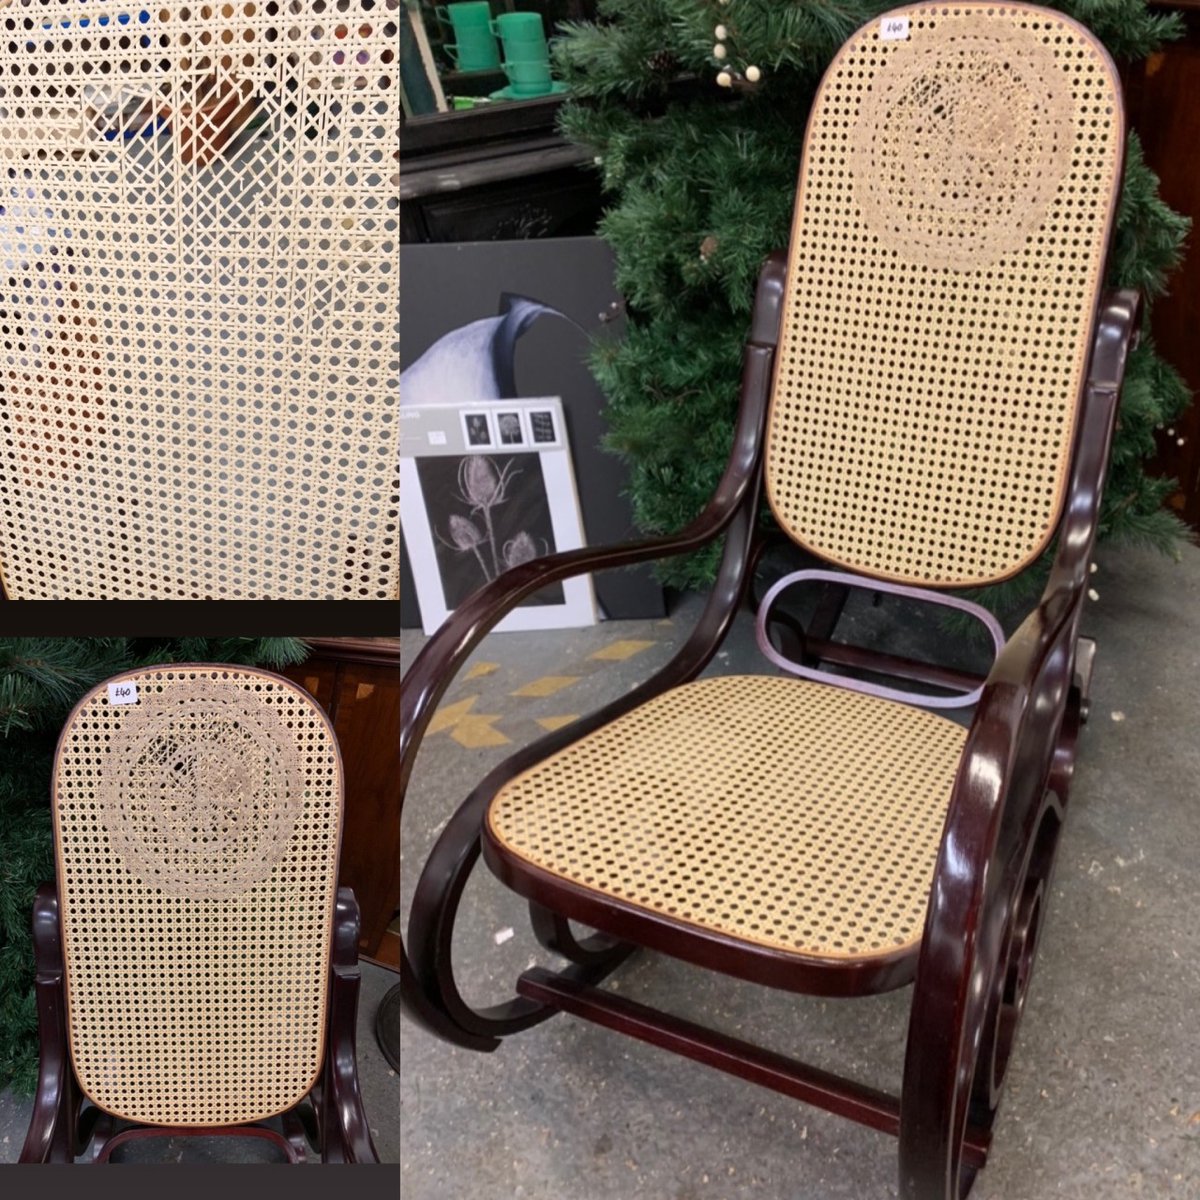 It's Repair Week! What items could you repair instead of replacing? Broken and unusable, this unloved rocking chair was repaired and rehomed. Our Re-use Shop team used materials they had to hand and a bit of creativity. #repairweek #LocalRepairHeroes #repairdontreplace